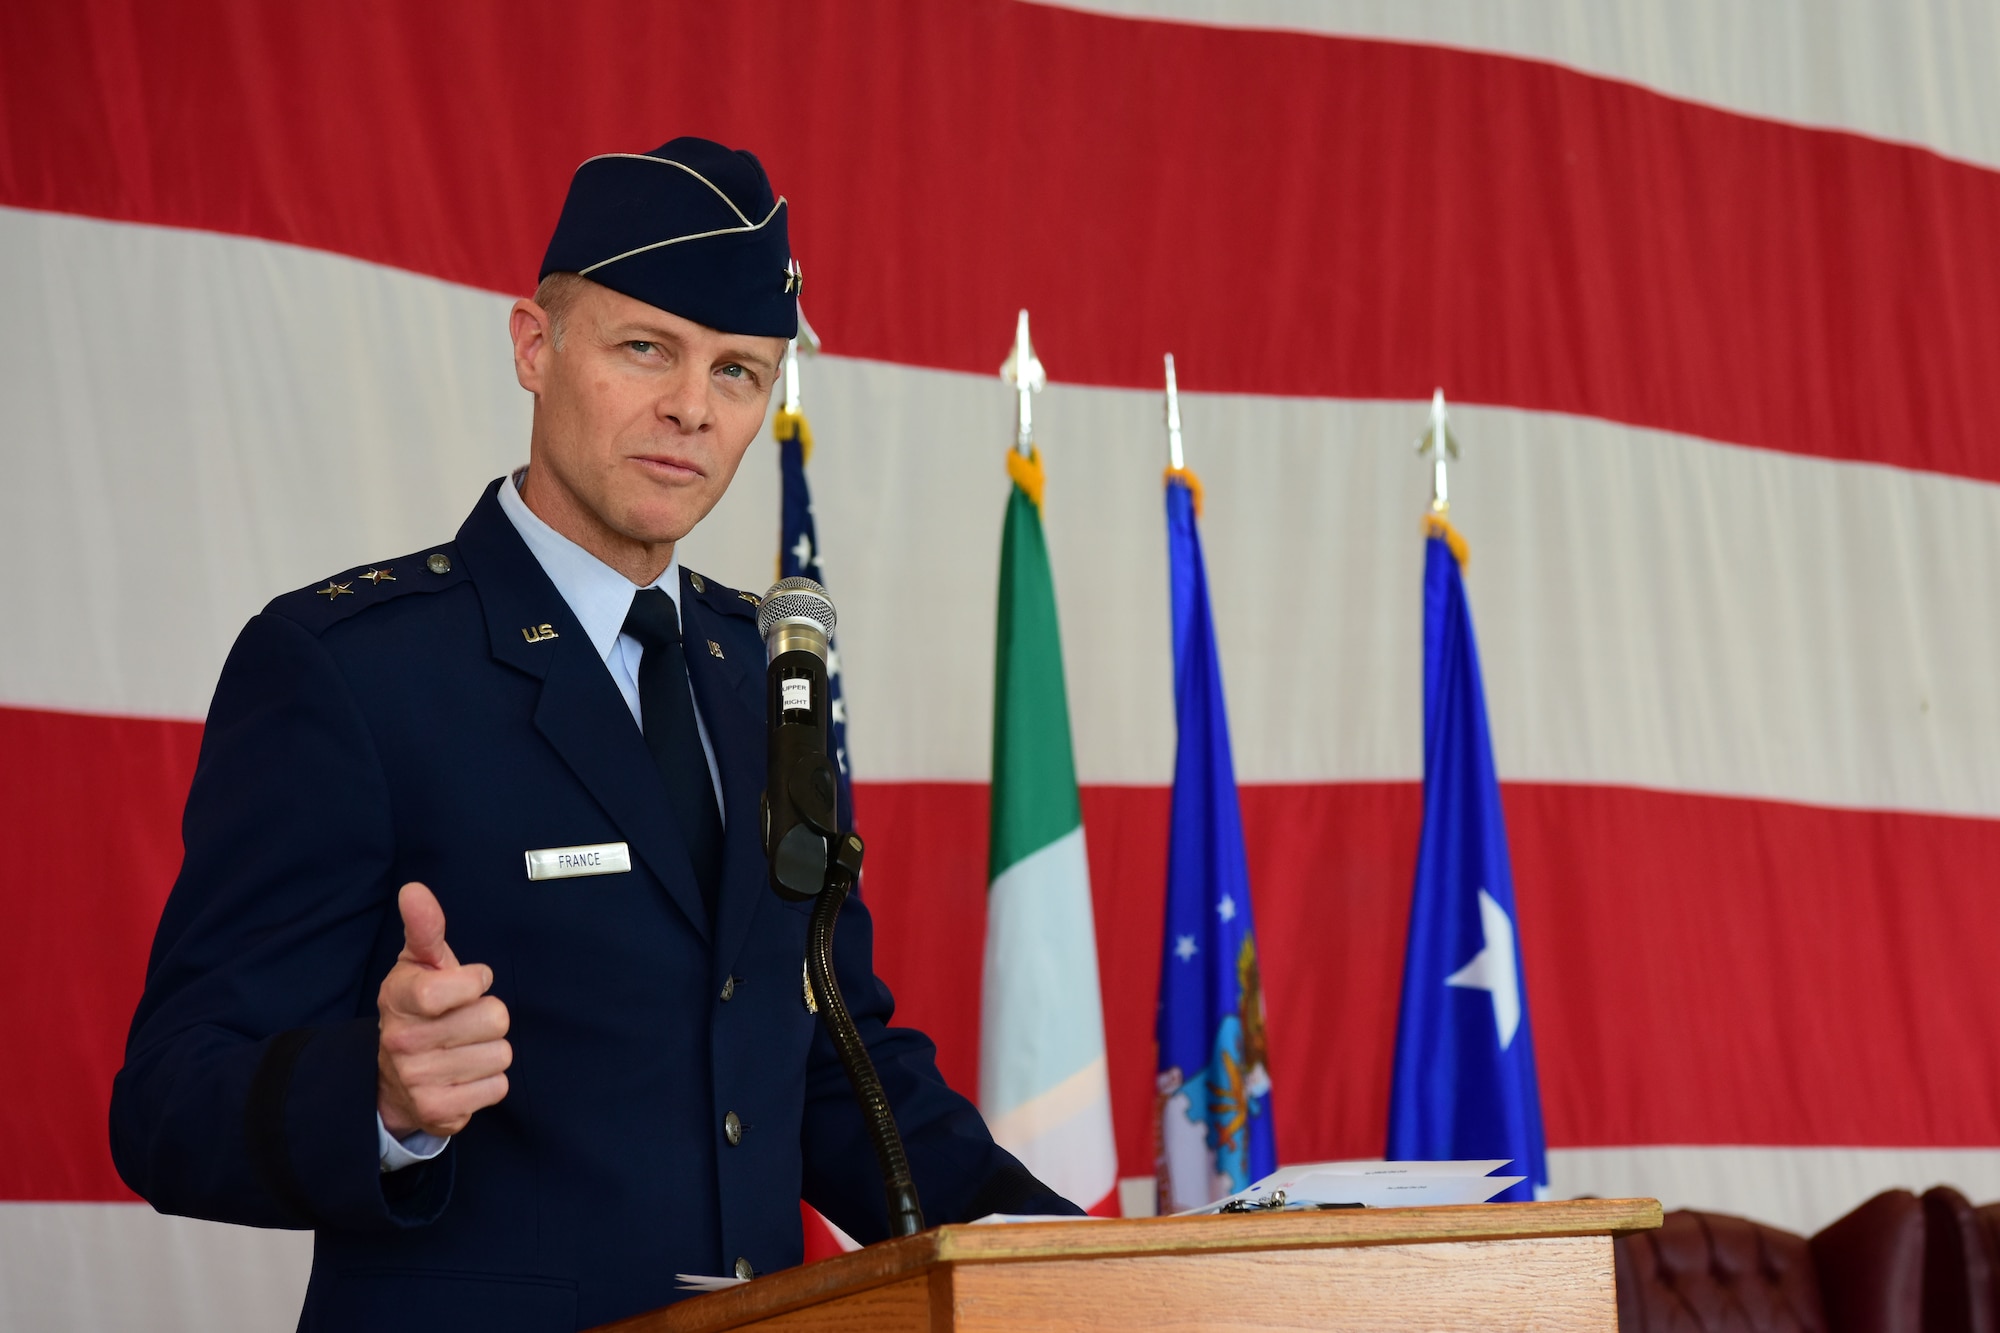 U.S. Air Force Maj. Gen. Derek C. France, 3rd Air Force commander, speaks at the 31st Fighter Wing change of command at Aviano Air Base